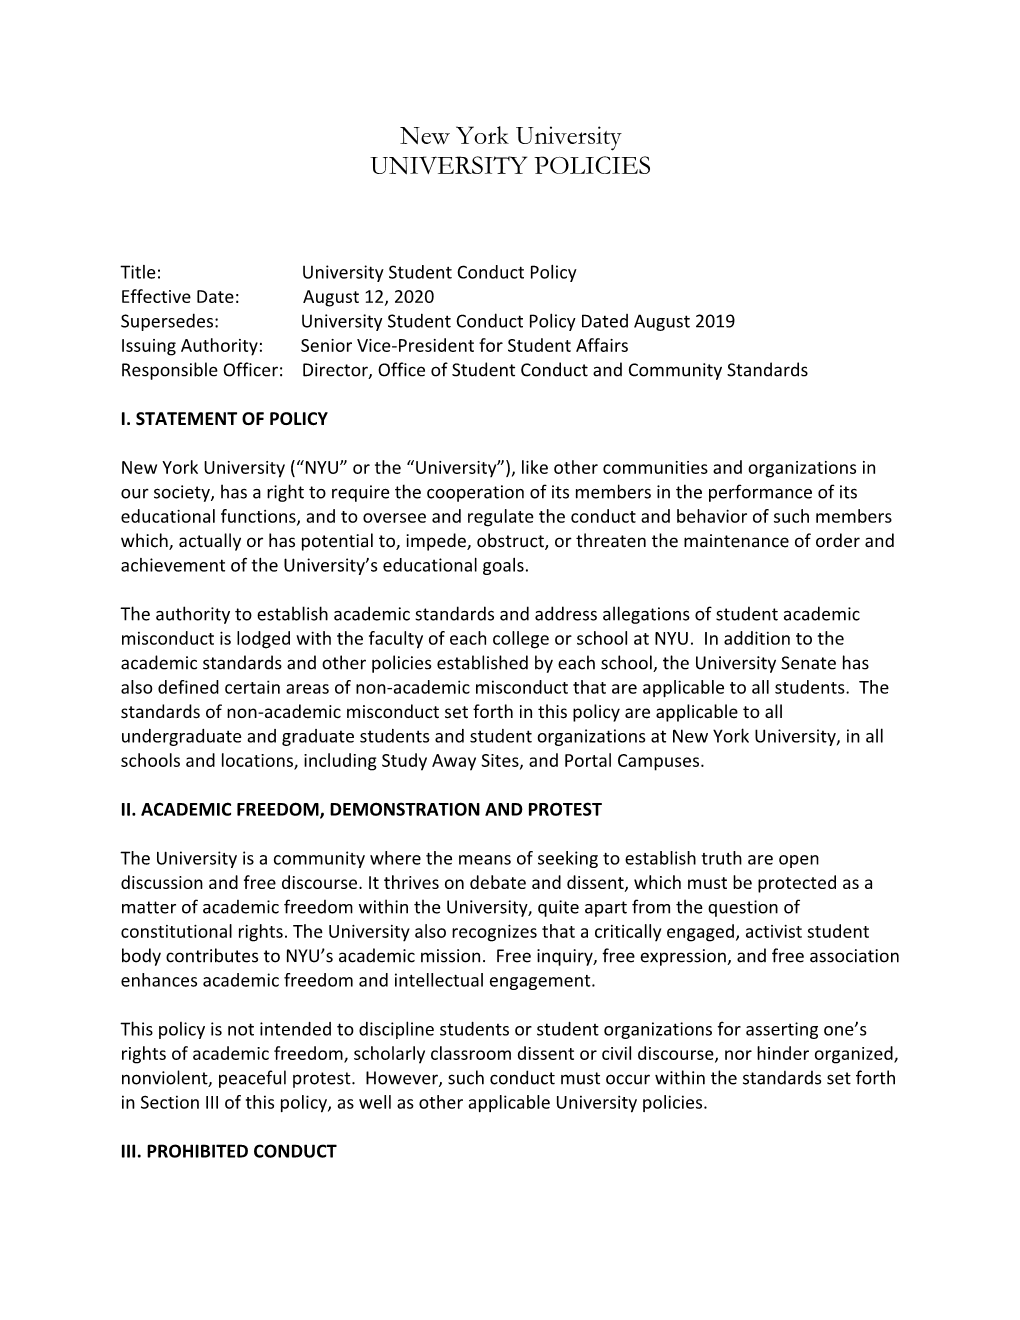 New York University Student Conduct Policy